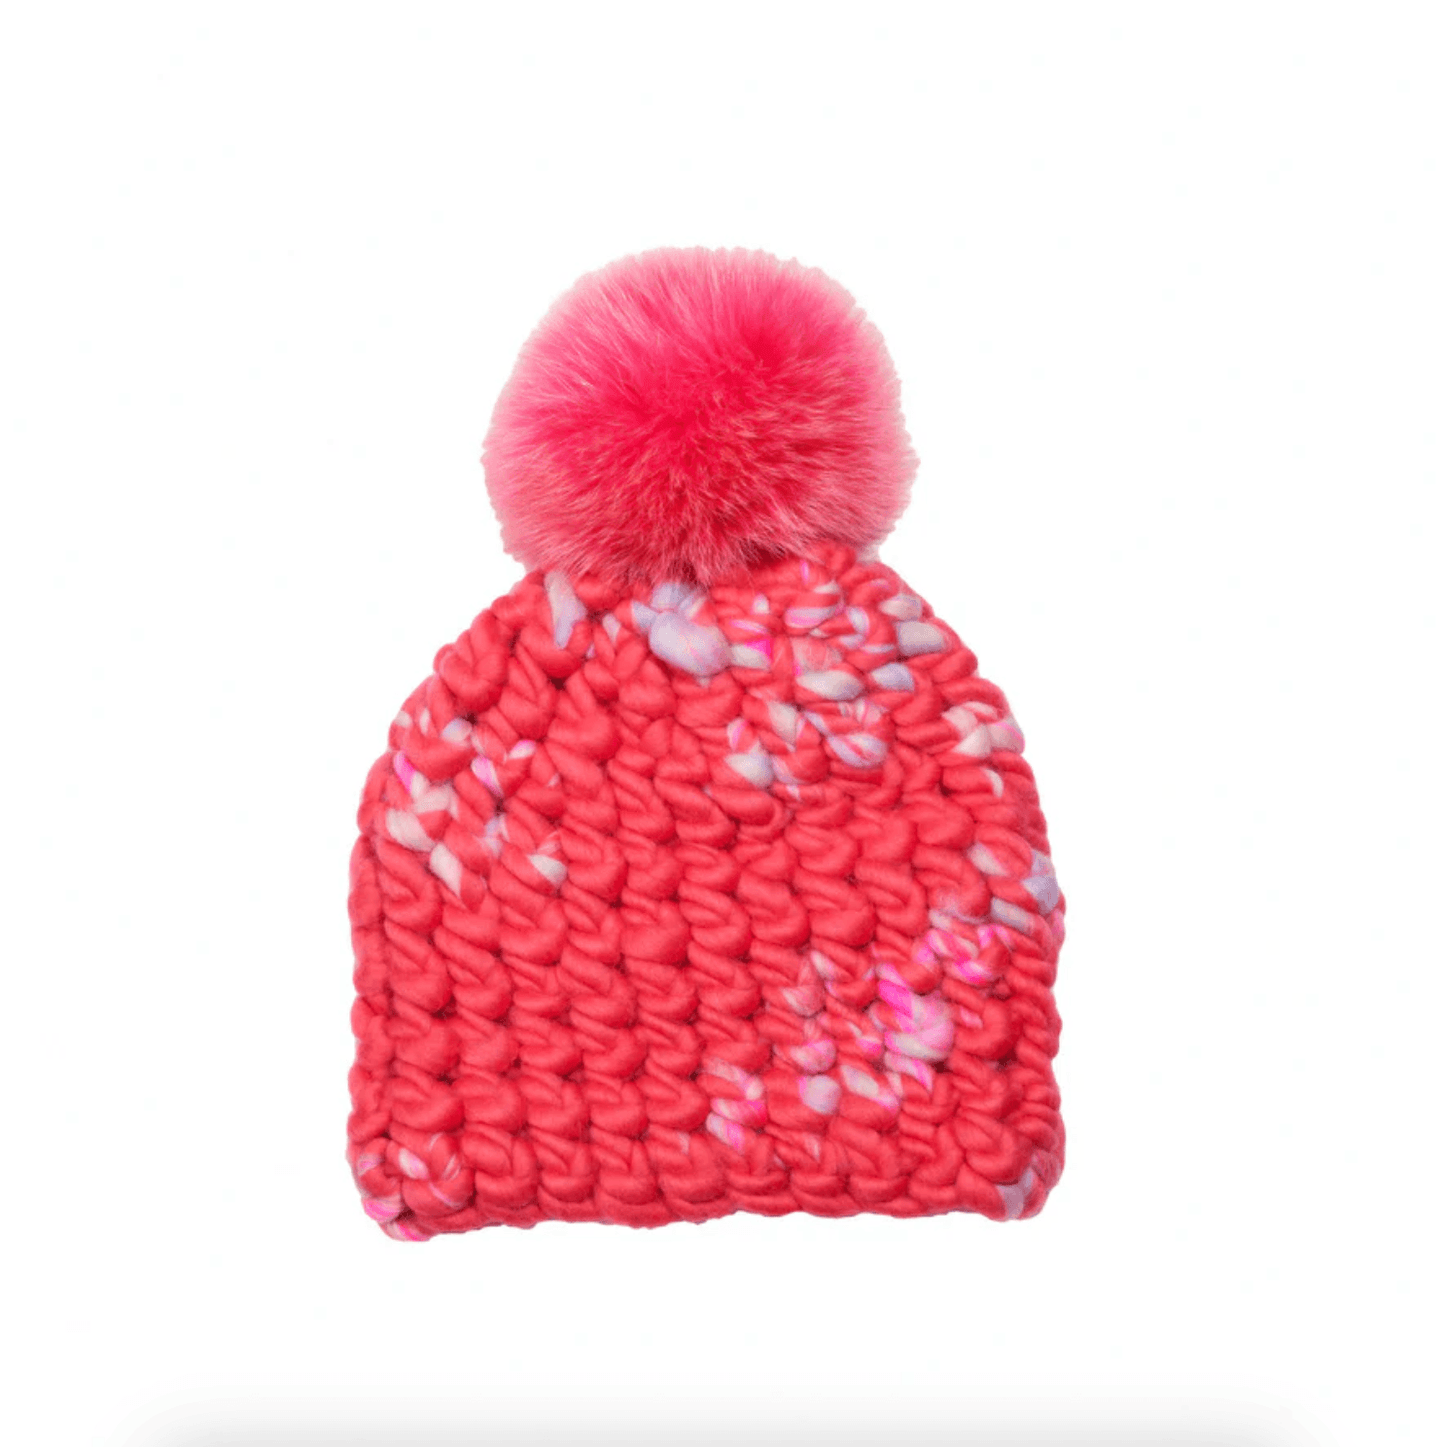 Pomster Beanie in Barbie x Coral by Mischa Lampert